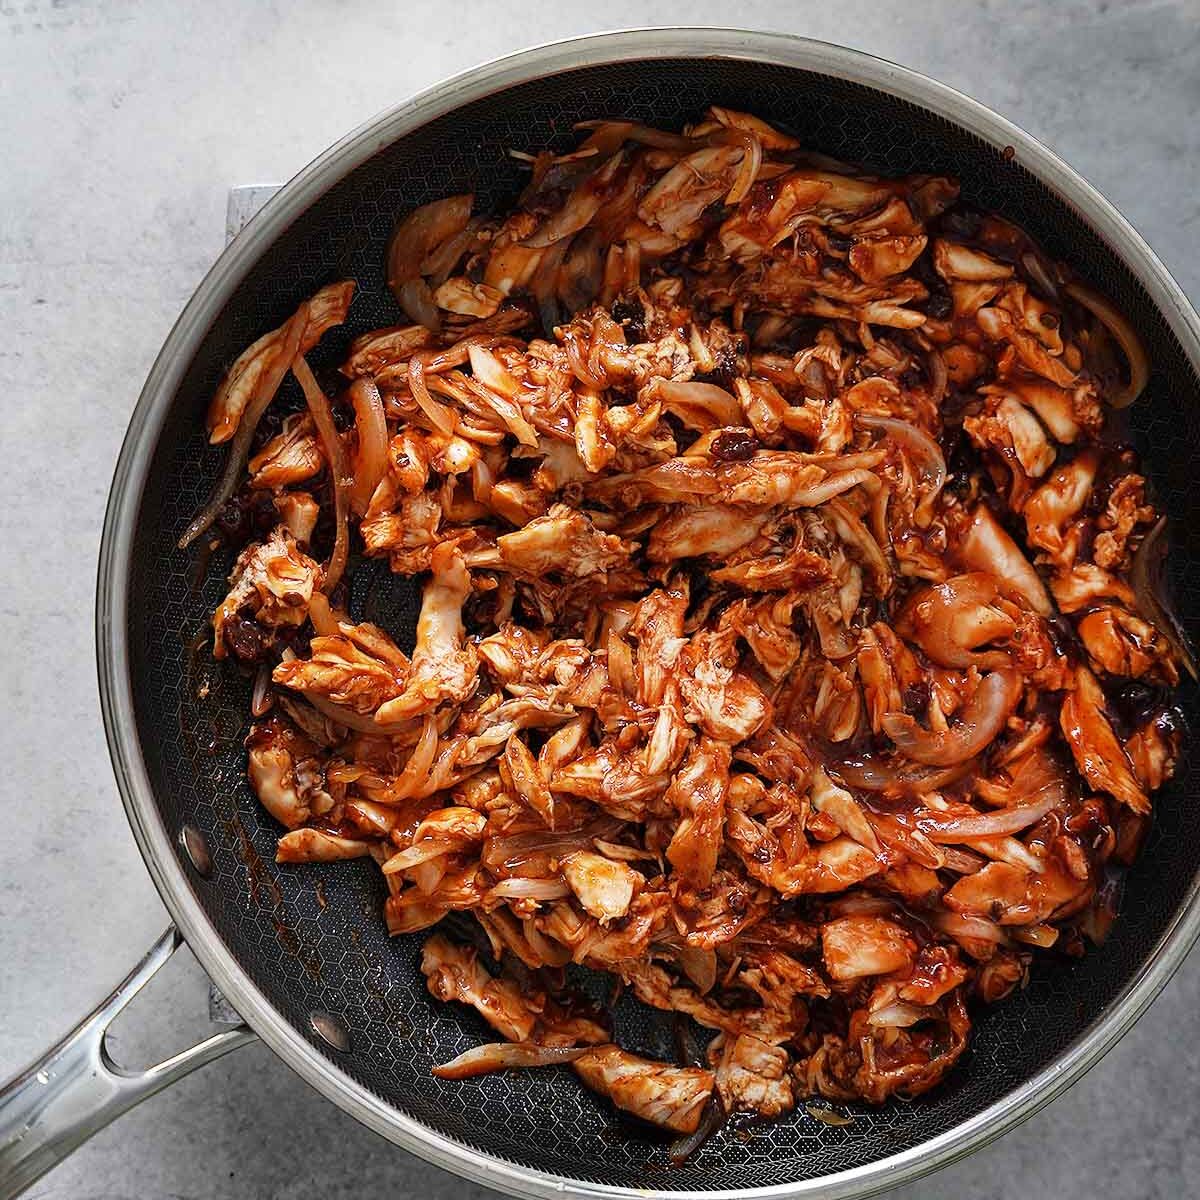 The shredded chicken mixture on a skillet.